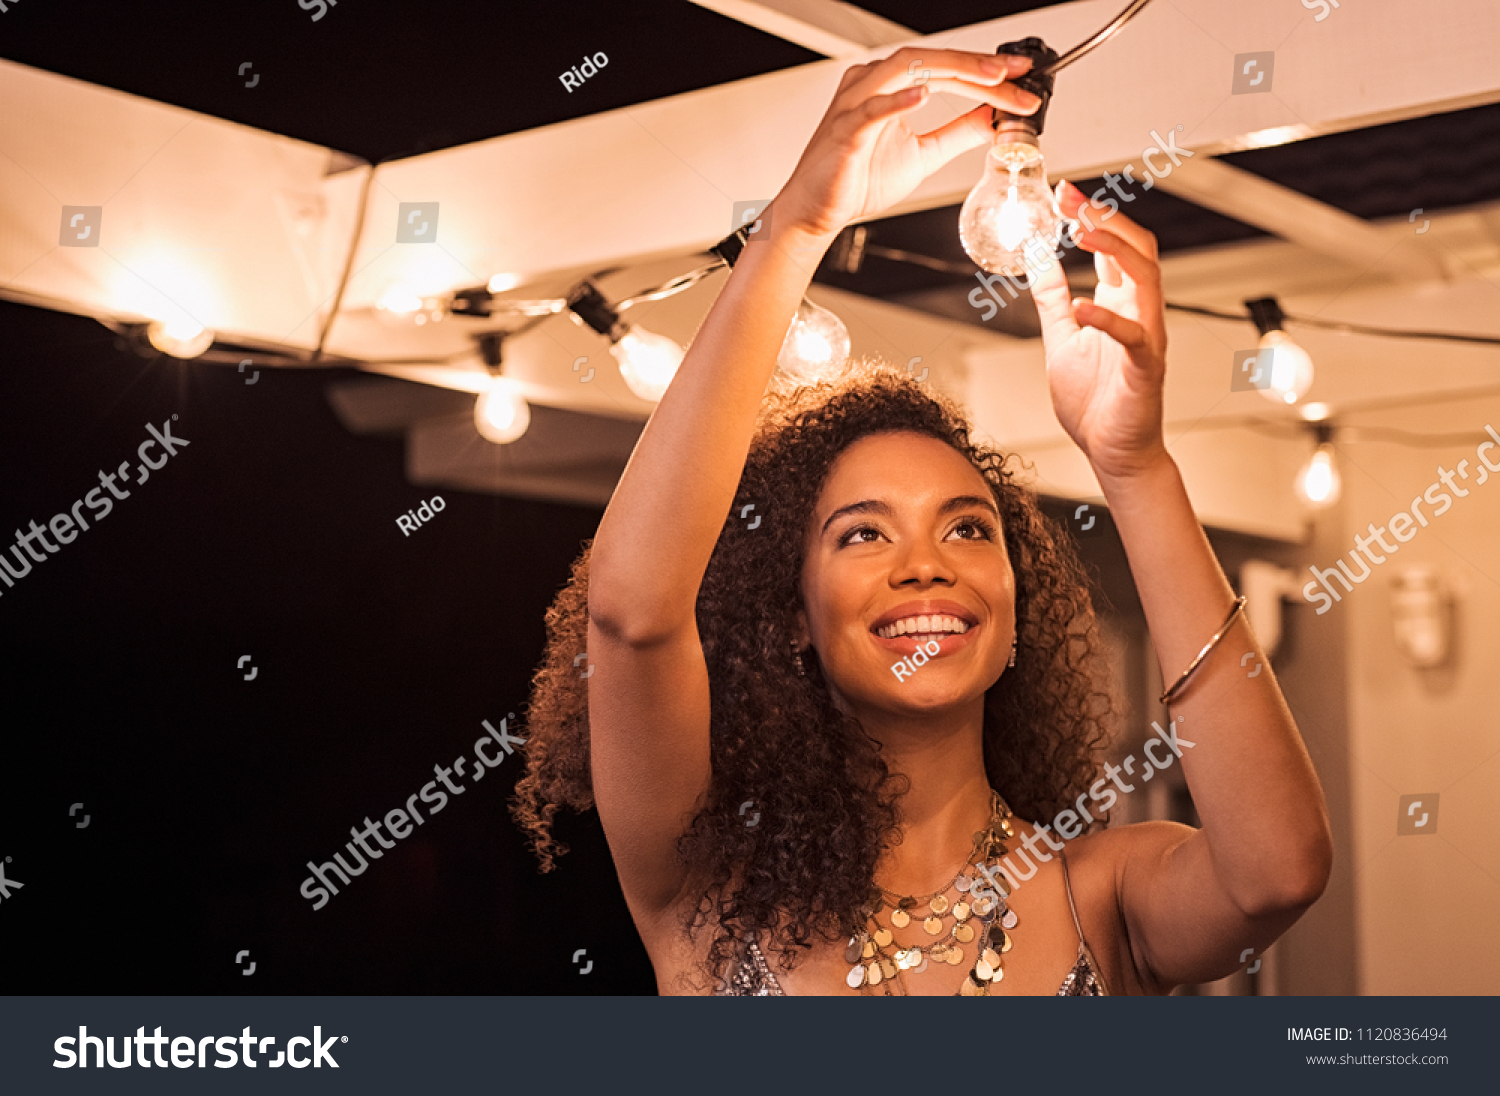 Cheerful young woman wearing party dress changing bulb light in patio. Happy smiling girl making preparation of party by adding lights outdoor. Happy beautiful woman enjoying fixing bulbs in backyard. #1120836494